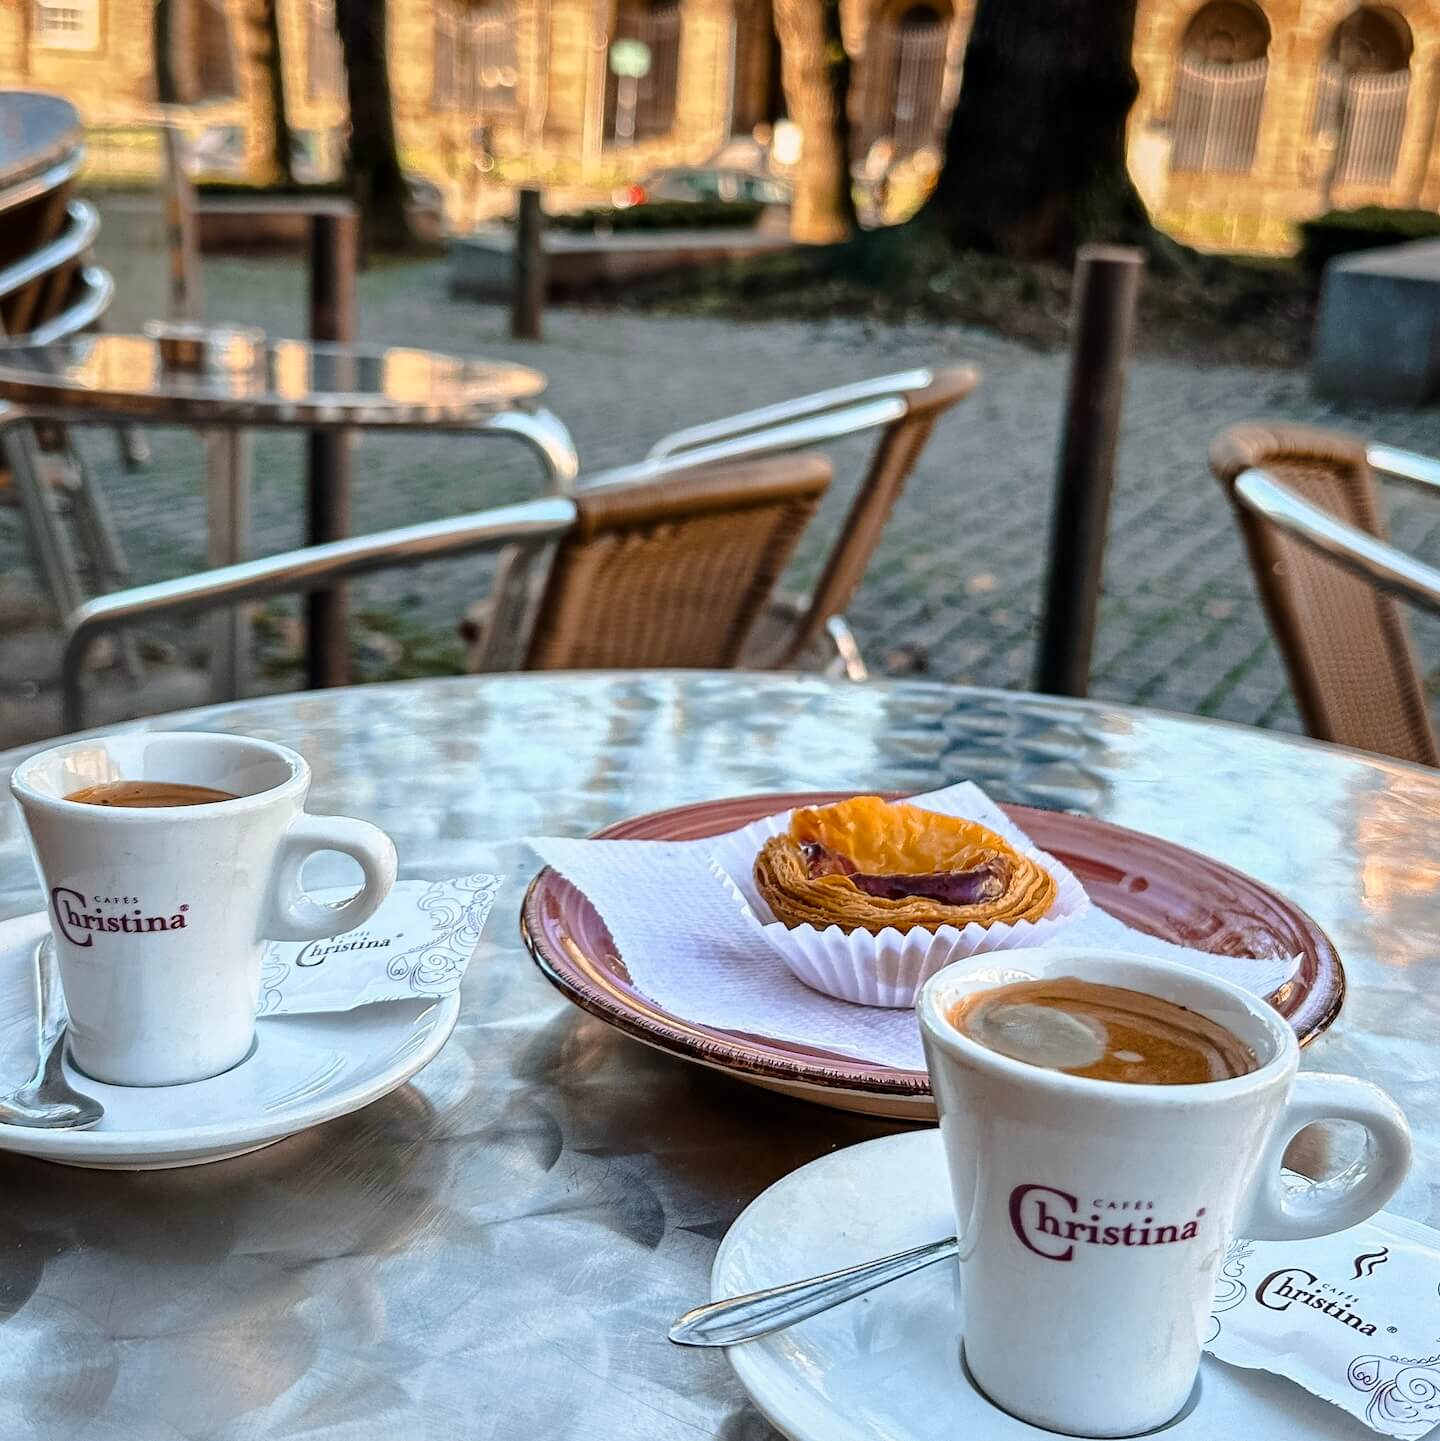 Two coffees and pastry in Porto